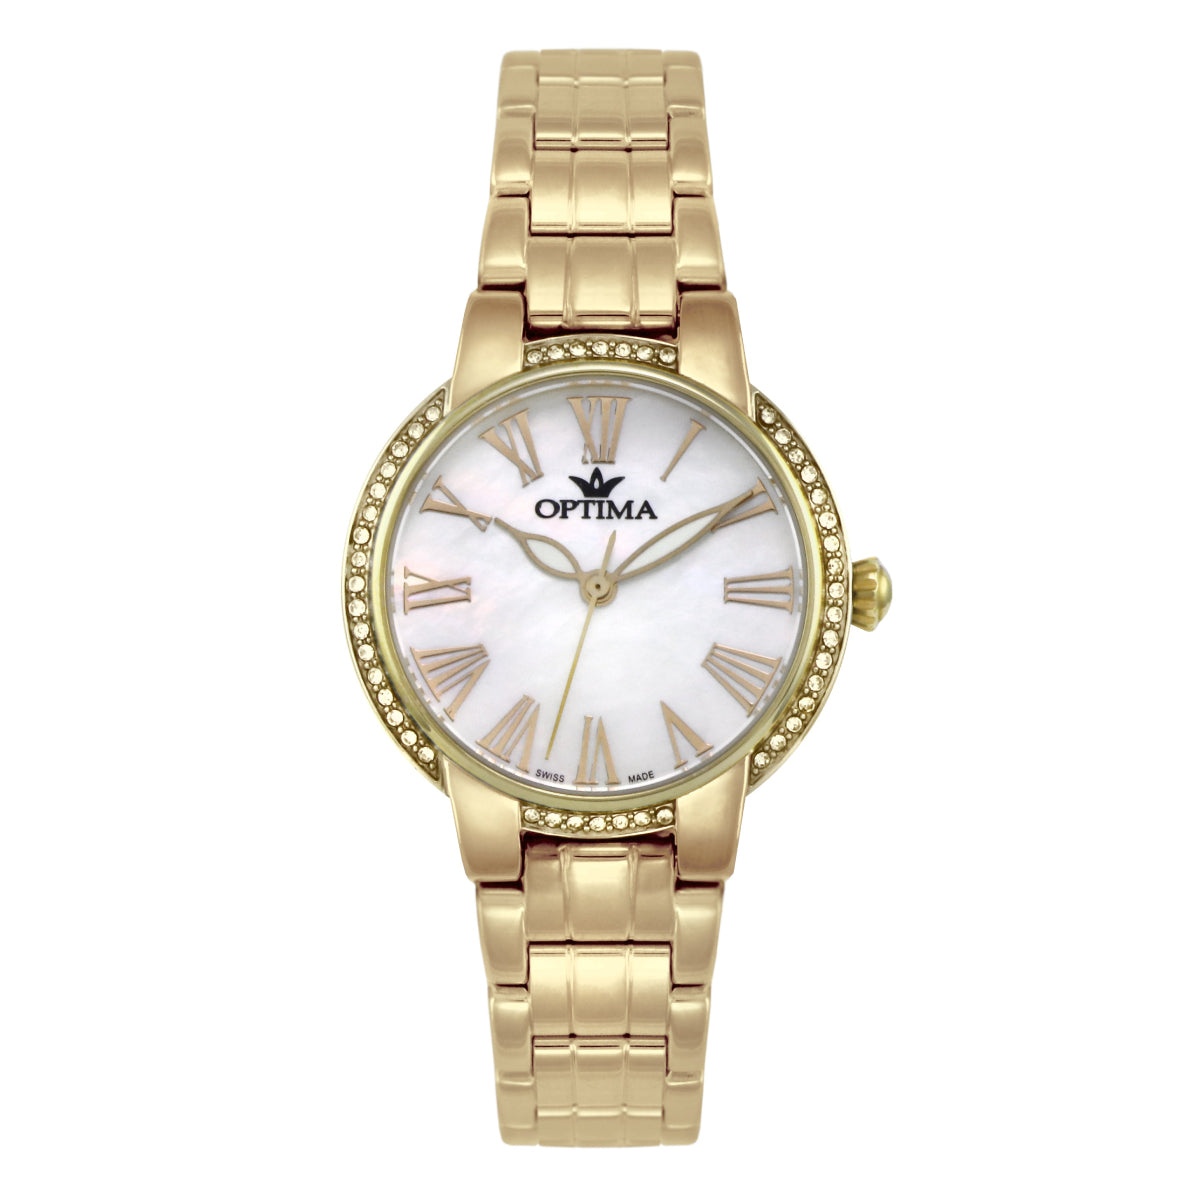 Optima Women's Swiss Quartz Watch with Pearly White Dial - OPT-0024